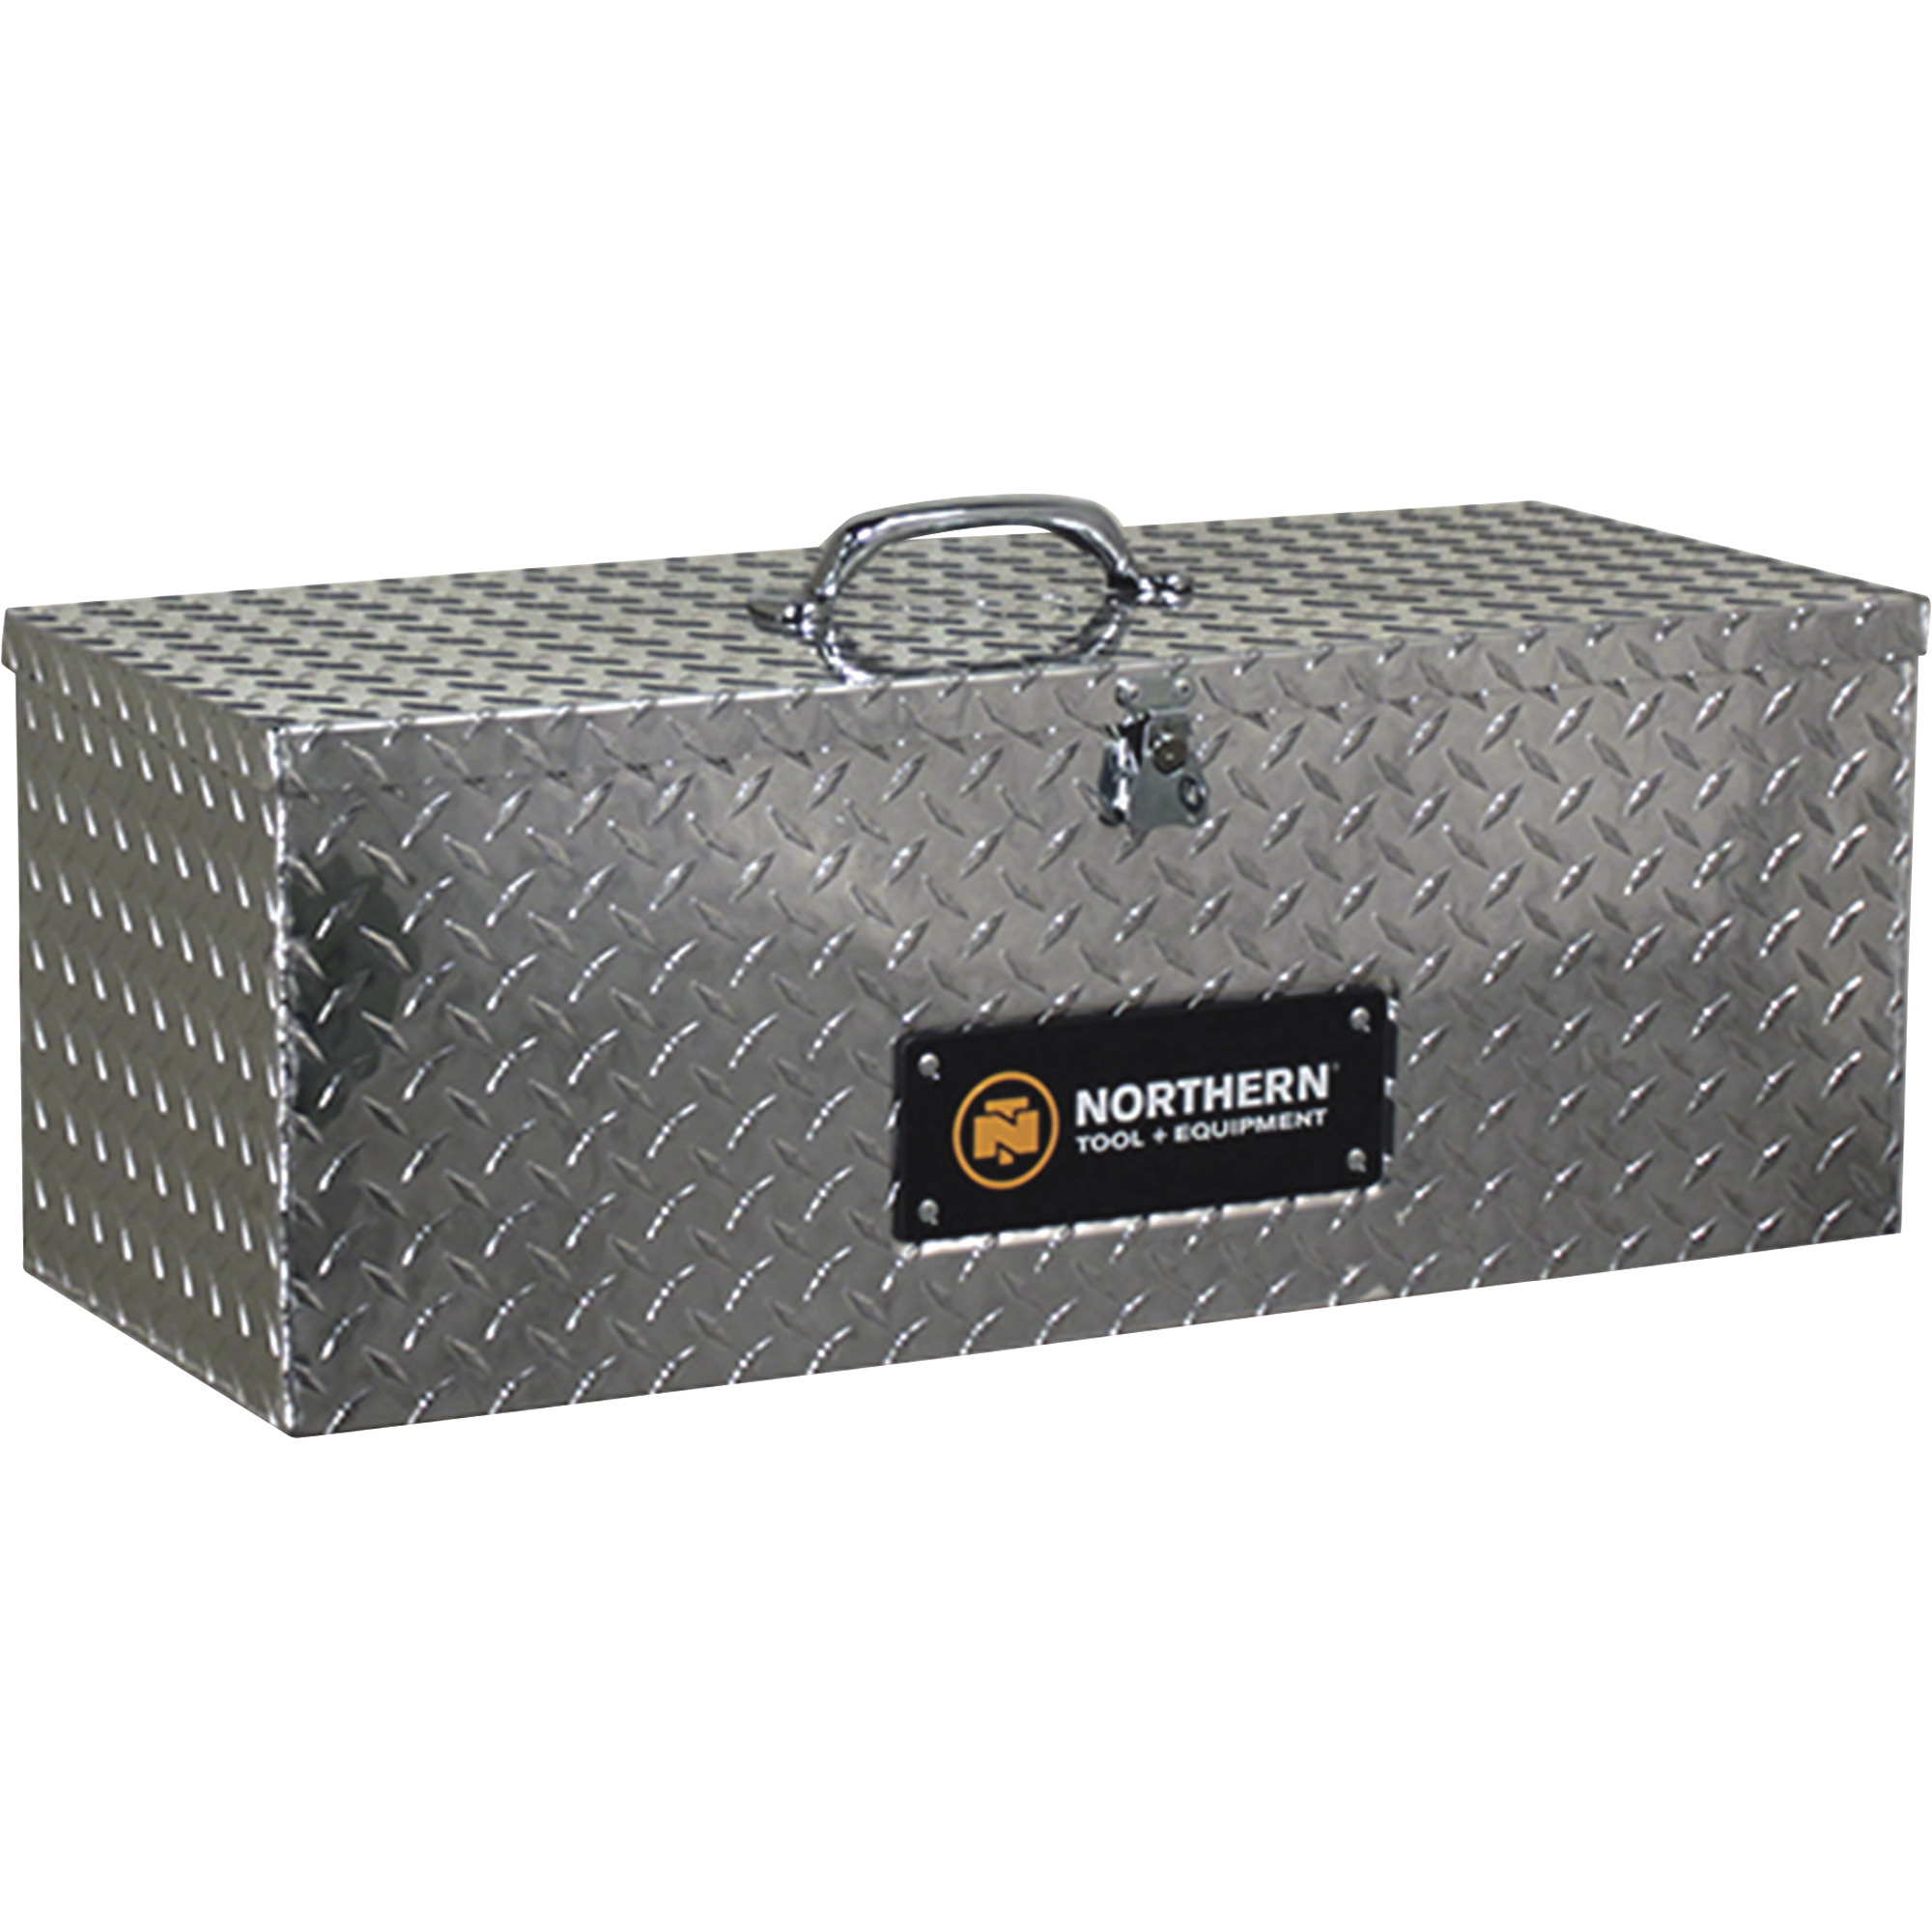 Northern Tool Tote Tool Box with Handle, Aluminum, Diamond Plate, Hasp Latch, 30Inch x 12Inch x 12Inch, Model 36012774